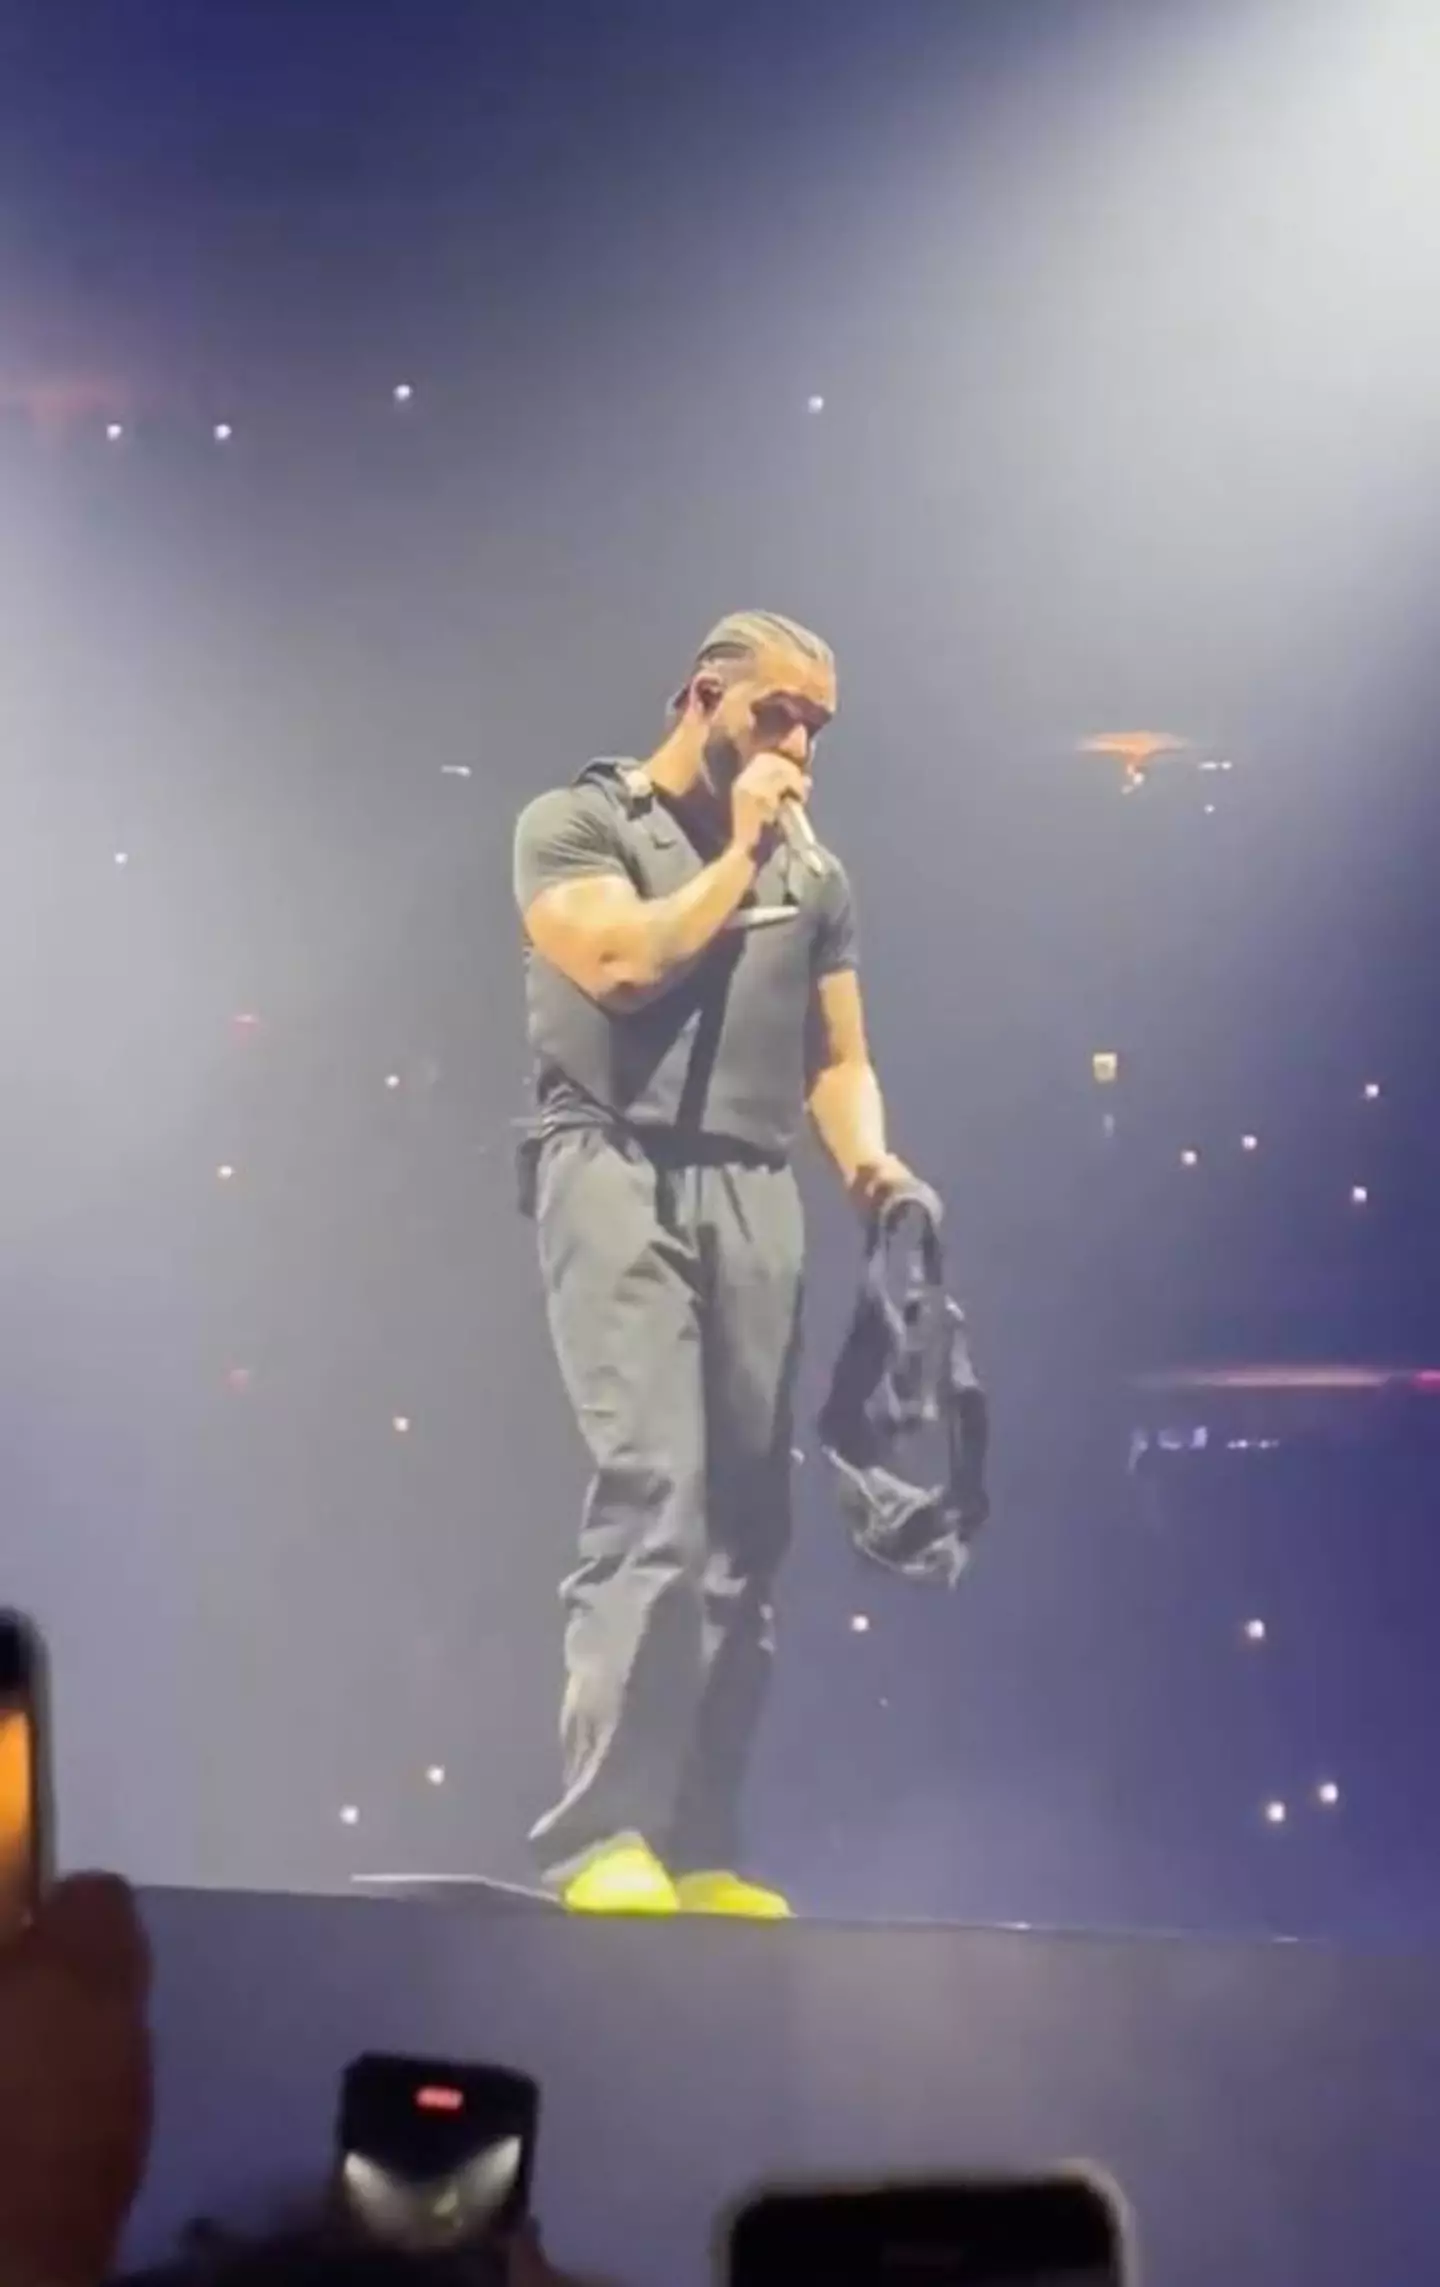 50 Cent complains about not having bras thrown at him on stage like Drake